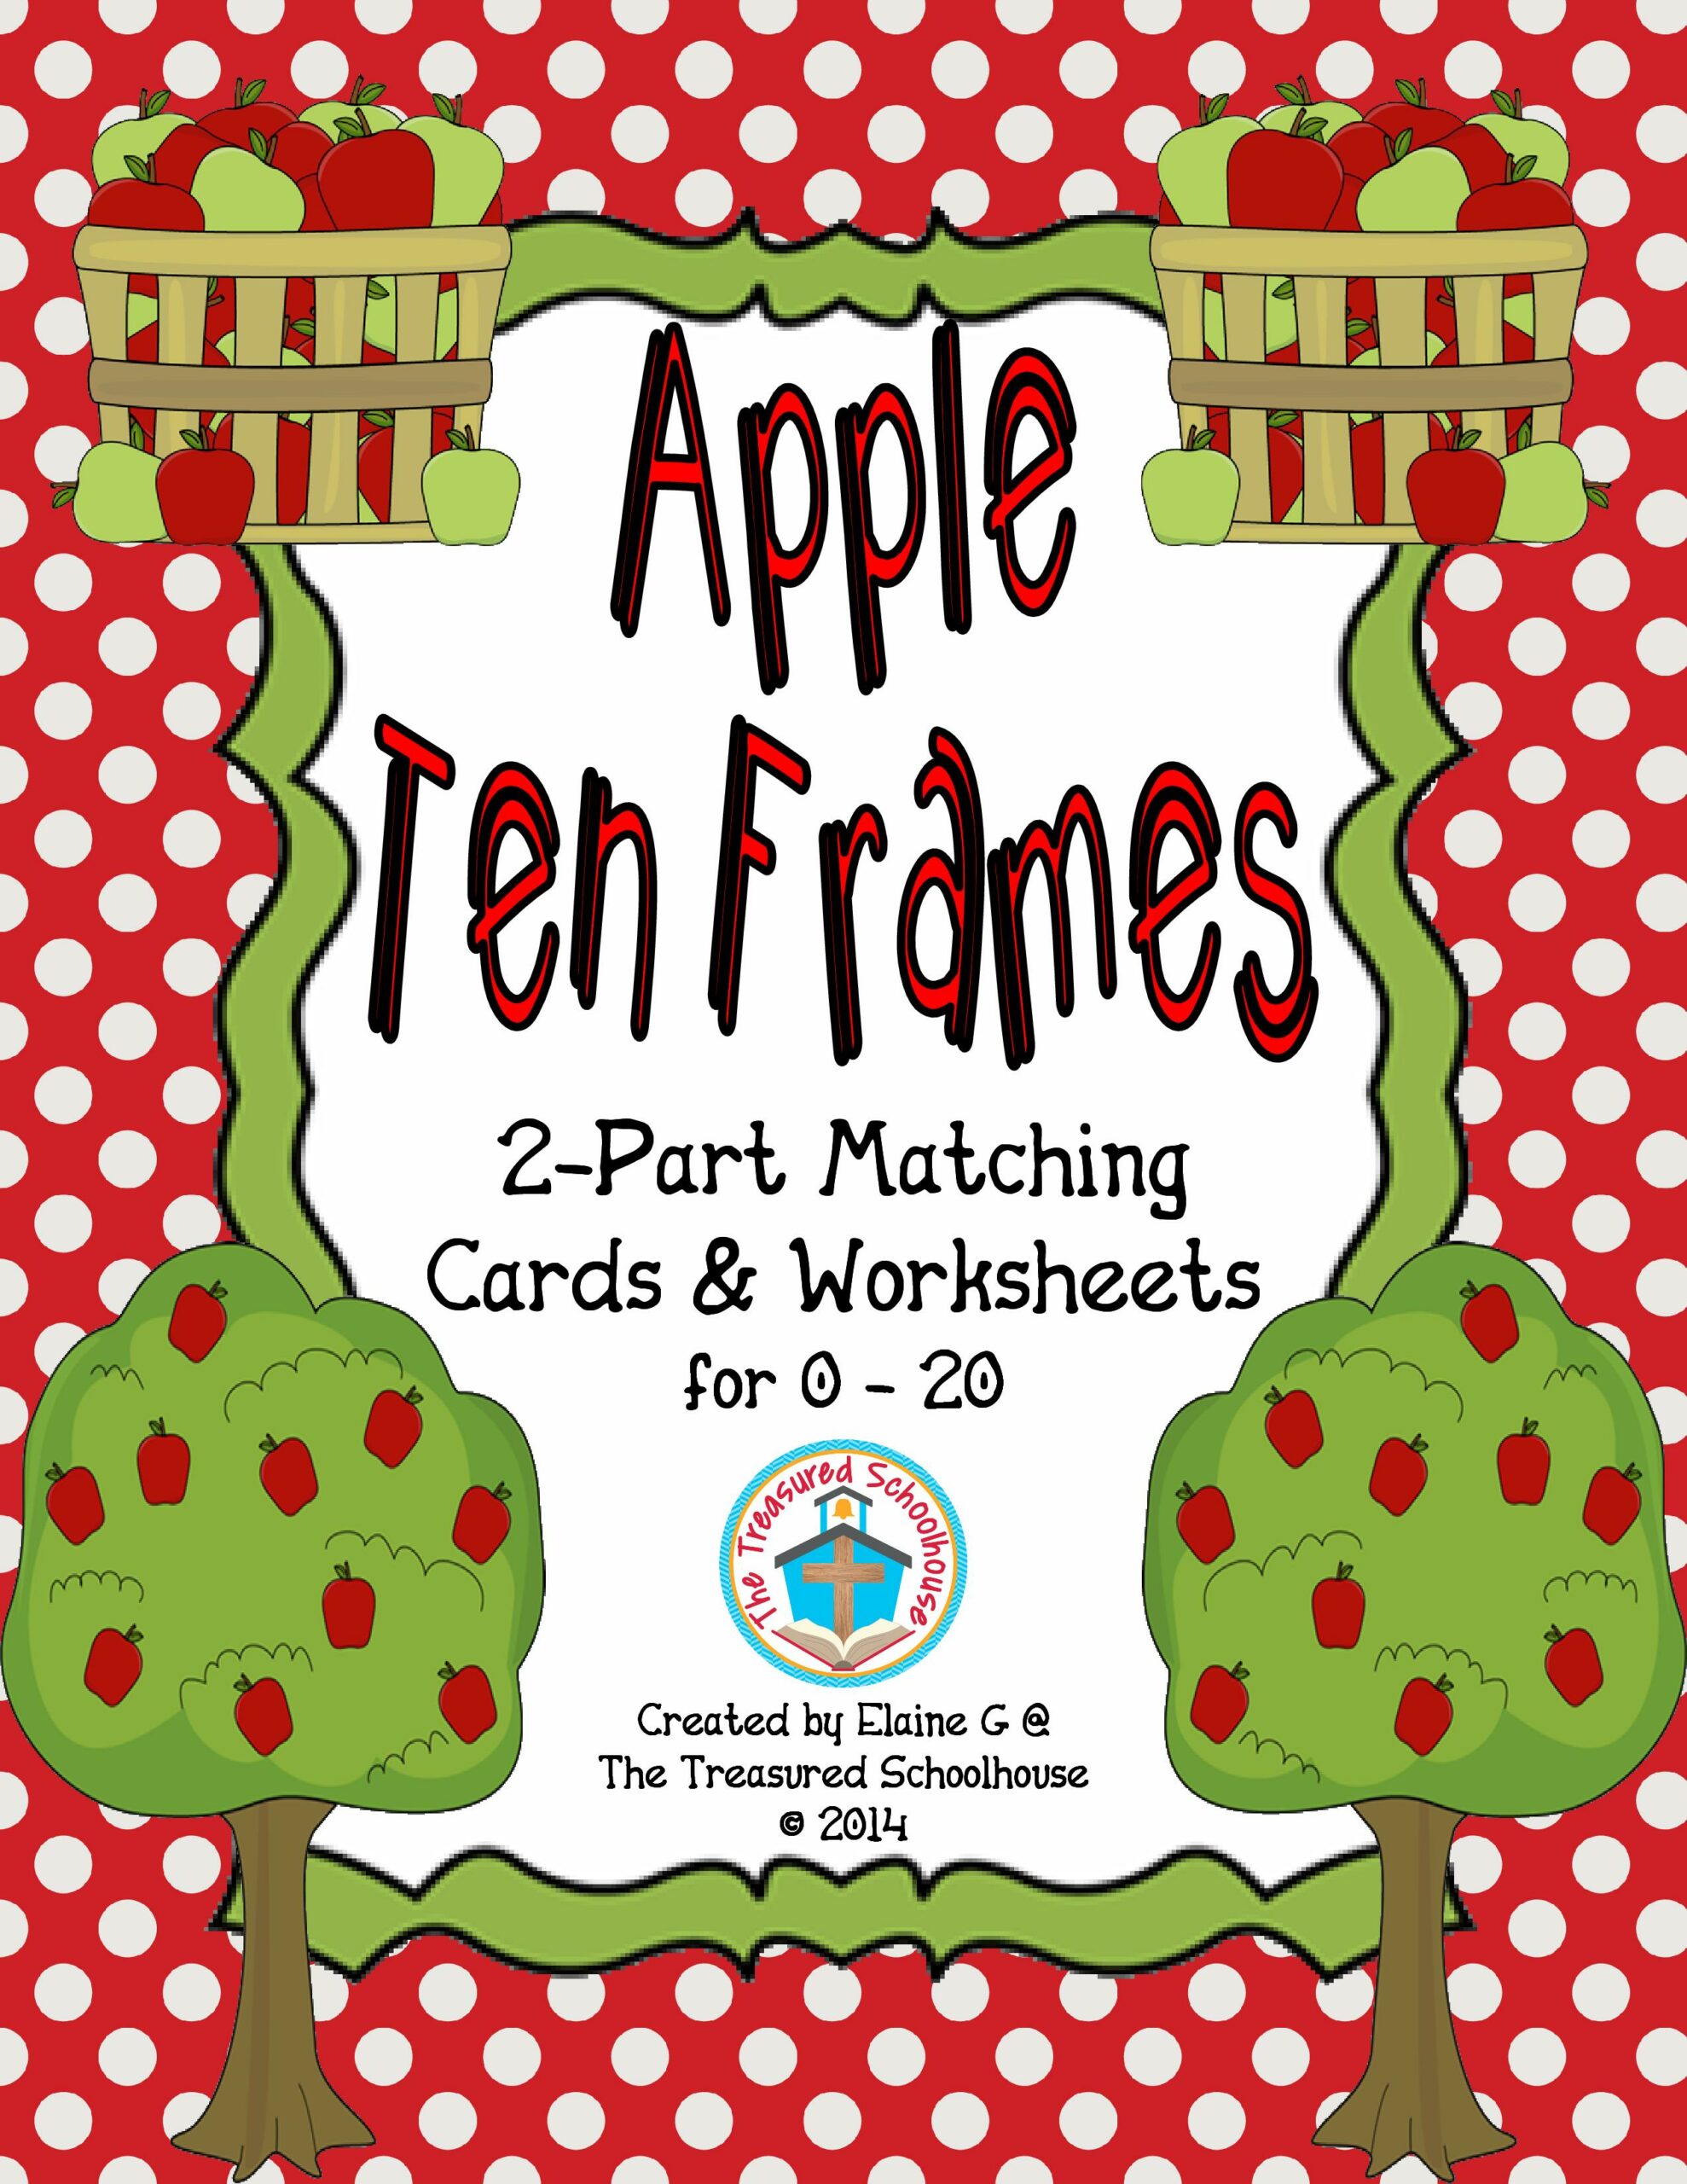 Ten Frame Matching Cards and Worksheets for 0-20 with Apples